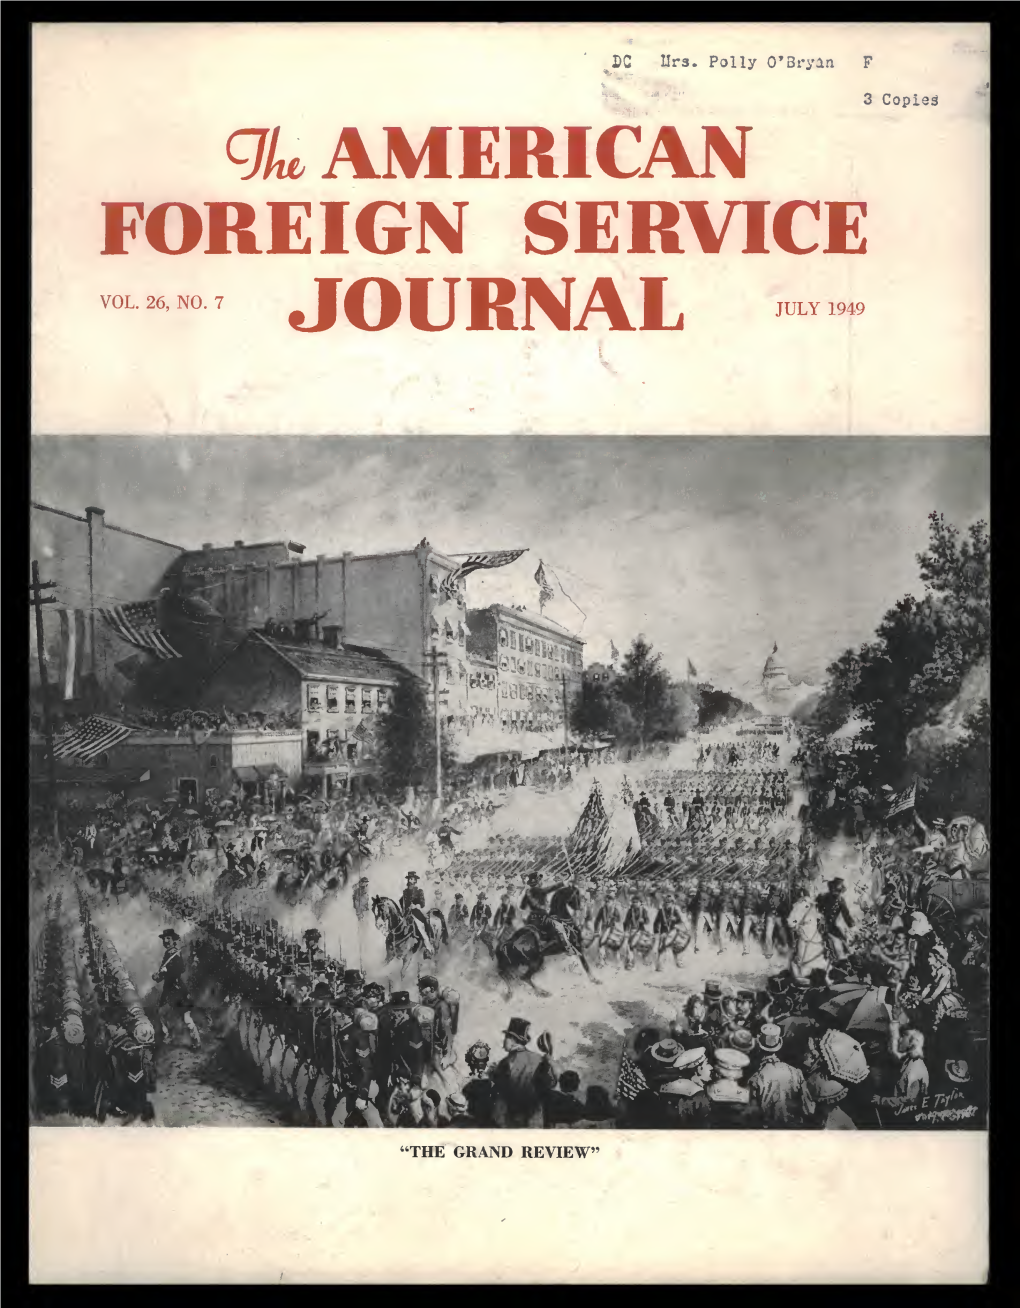 The Foreign Service Journal, July 1949